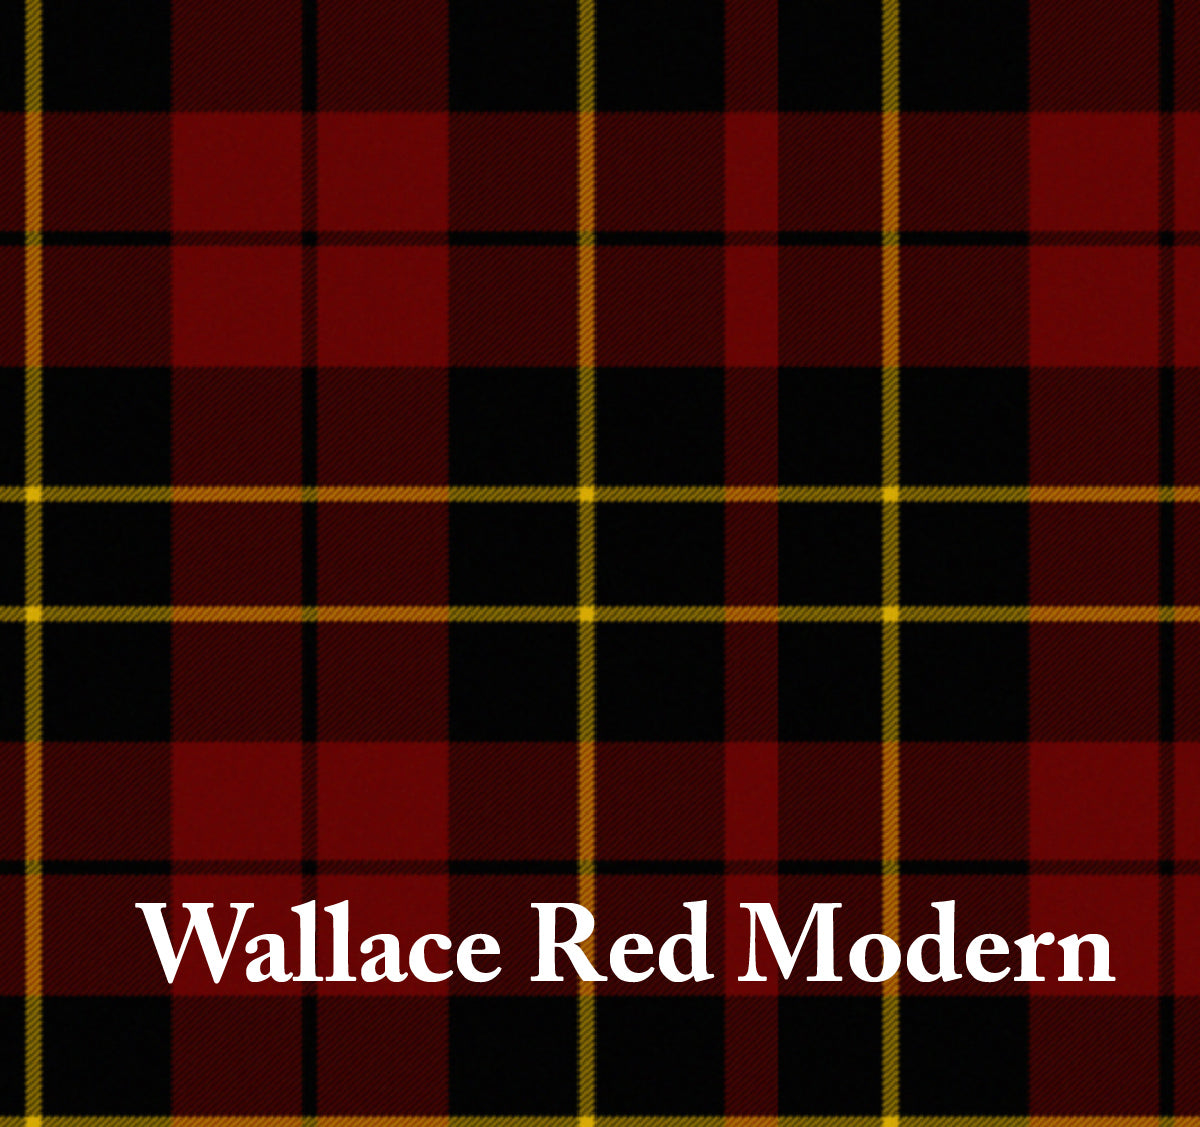 Wallace Red Modern